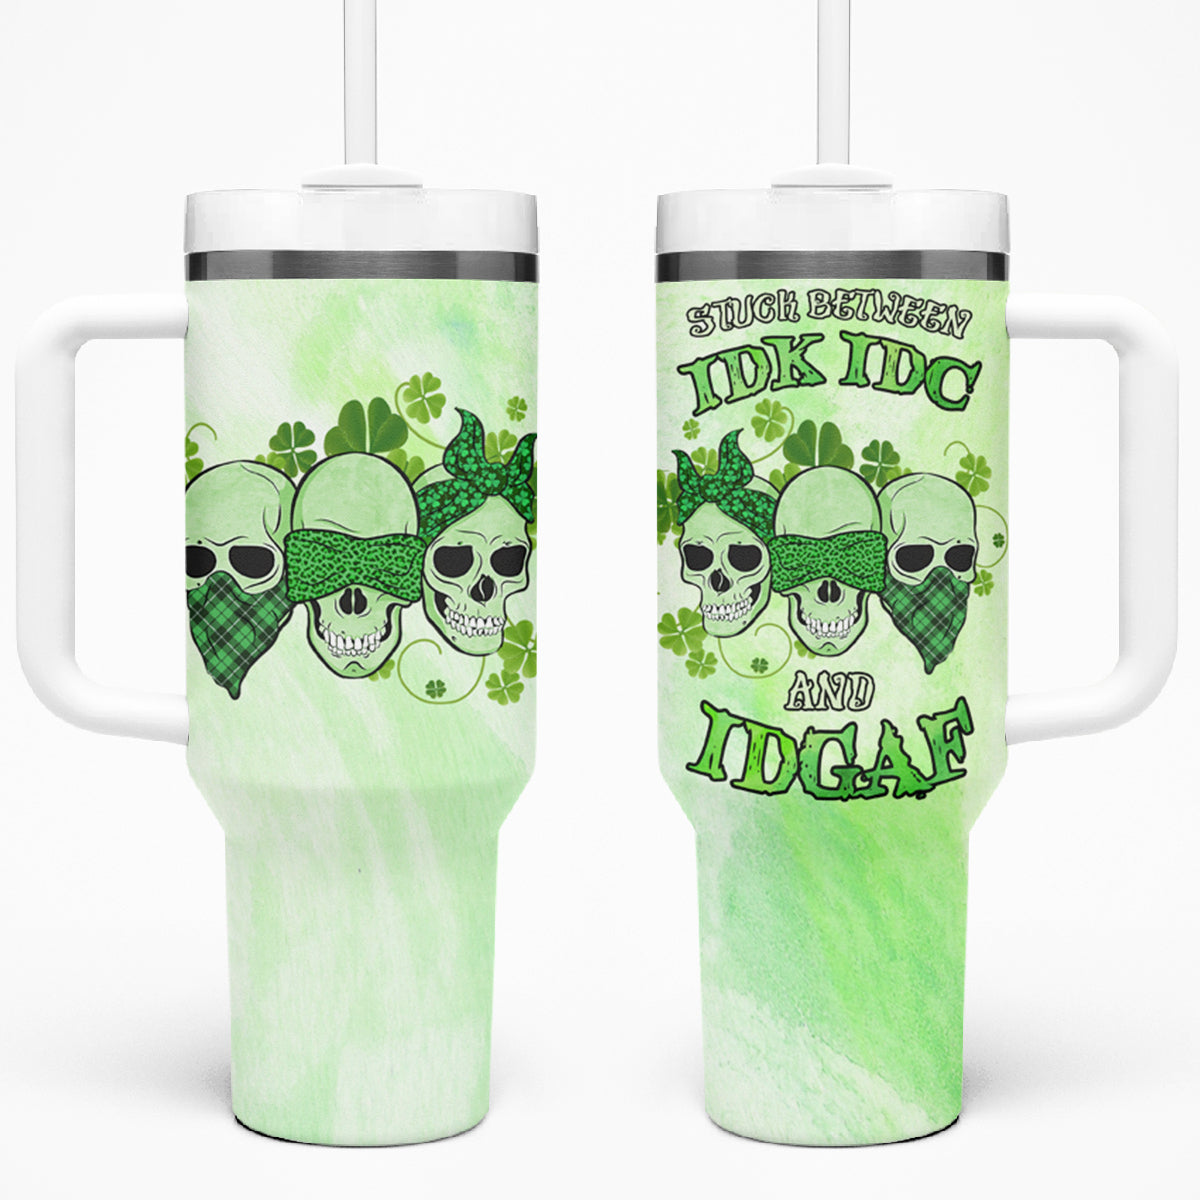 Stuck Between Idk Idc And Idgaf Rose Skull Patrick's Day Tumbler With Handle